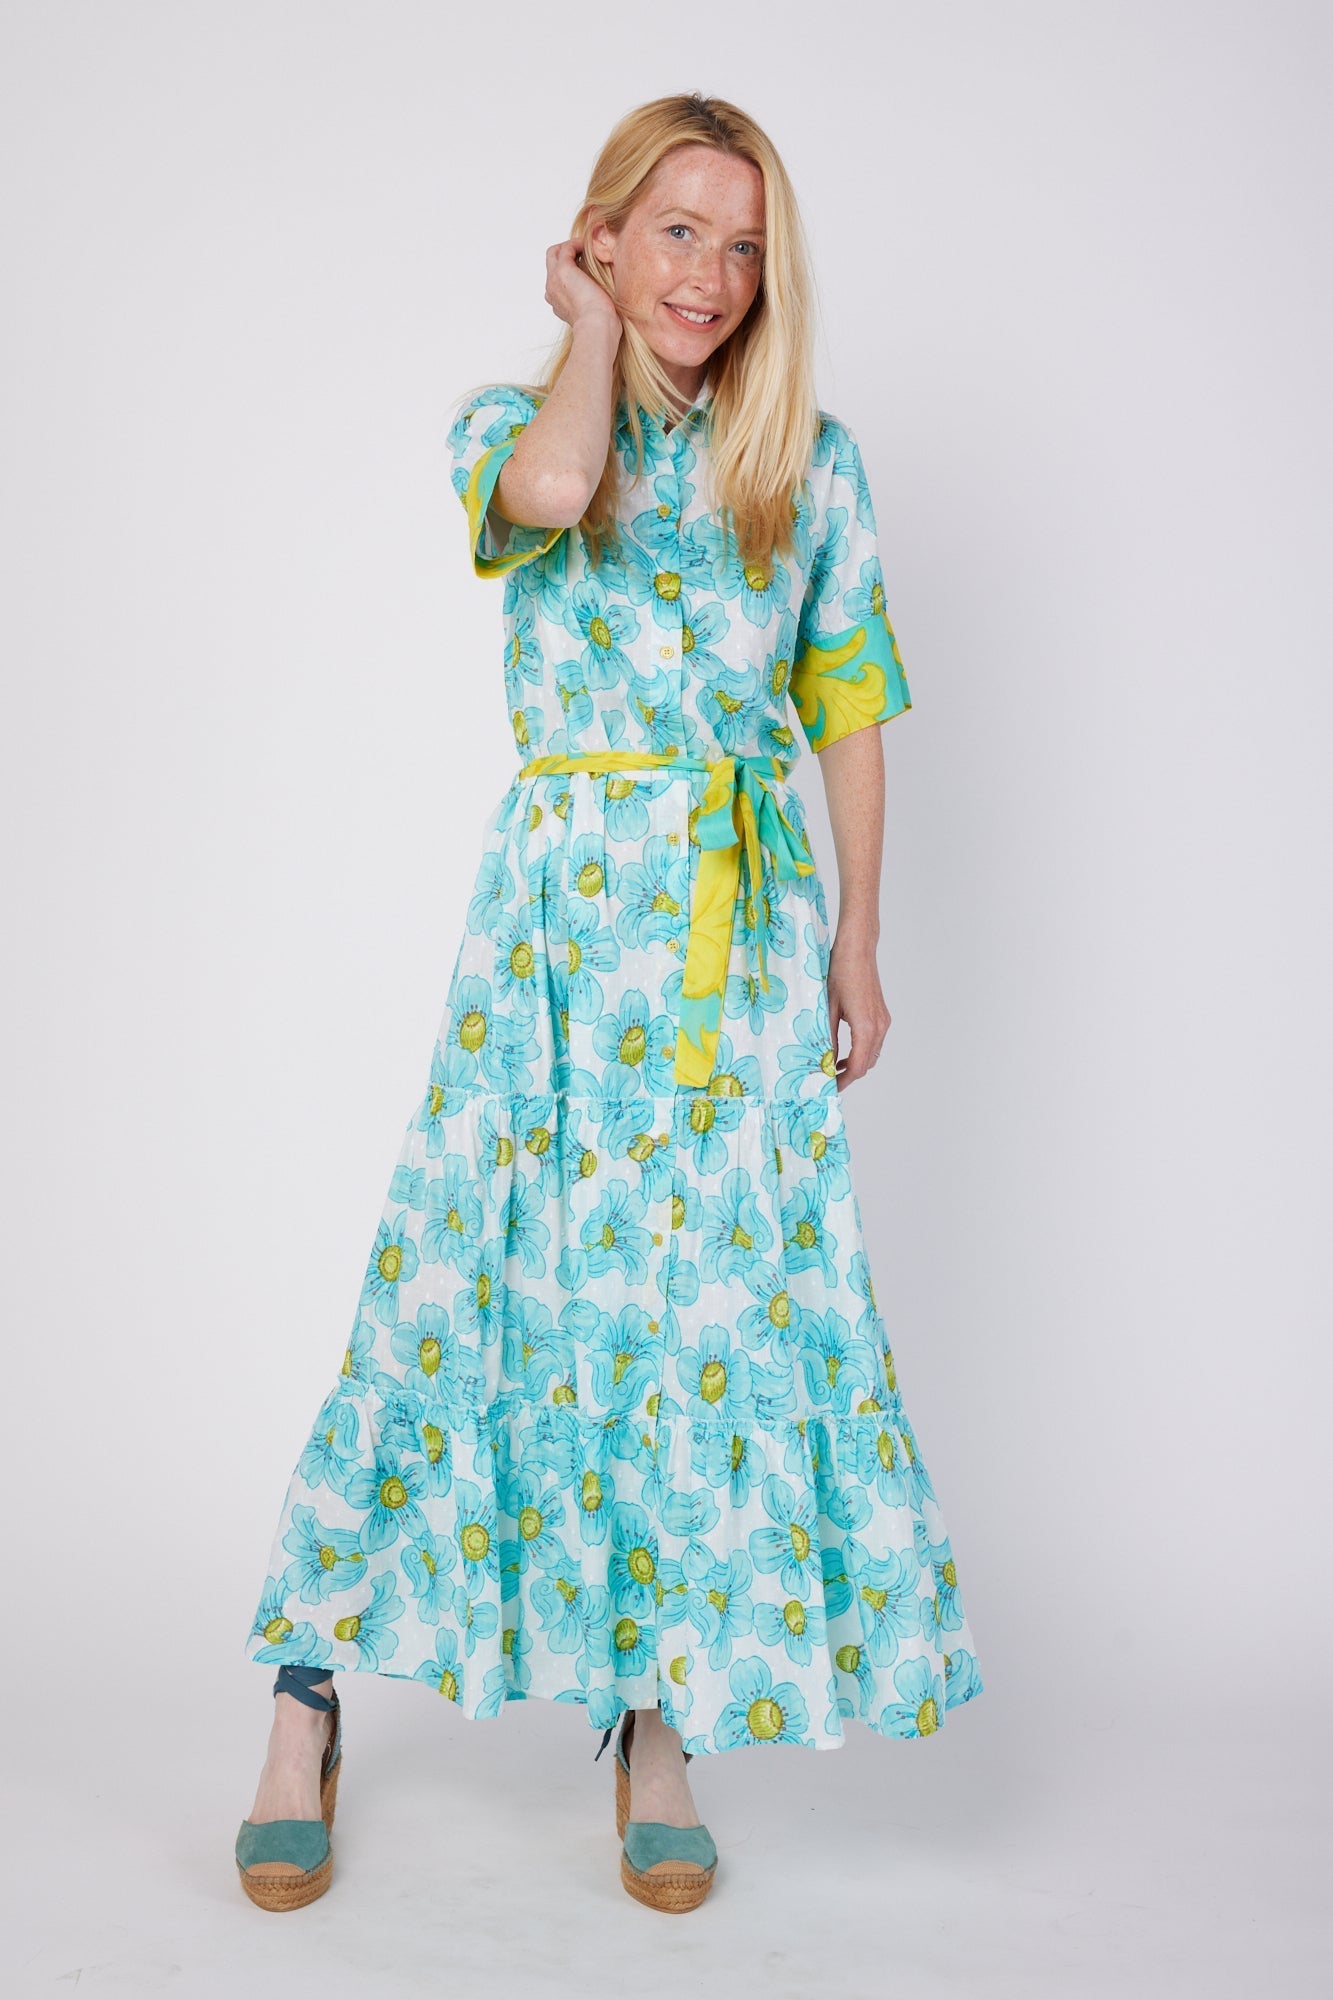 ModaPosa Alcee Short Puff Sleeve Maxi Dress with Collar and Detachable Belt in Blue Floral . Discover women's resort dresses and lifestyle clothing inspired by the Mediterranean. Free worldwide shipping available!